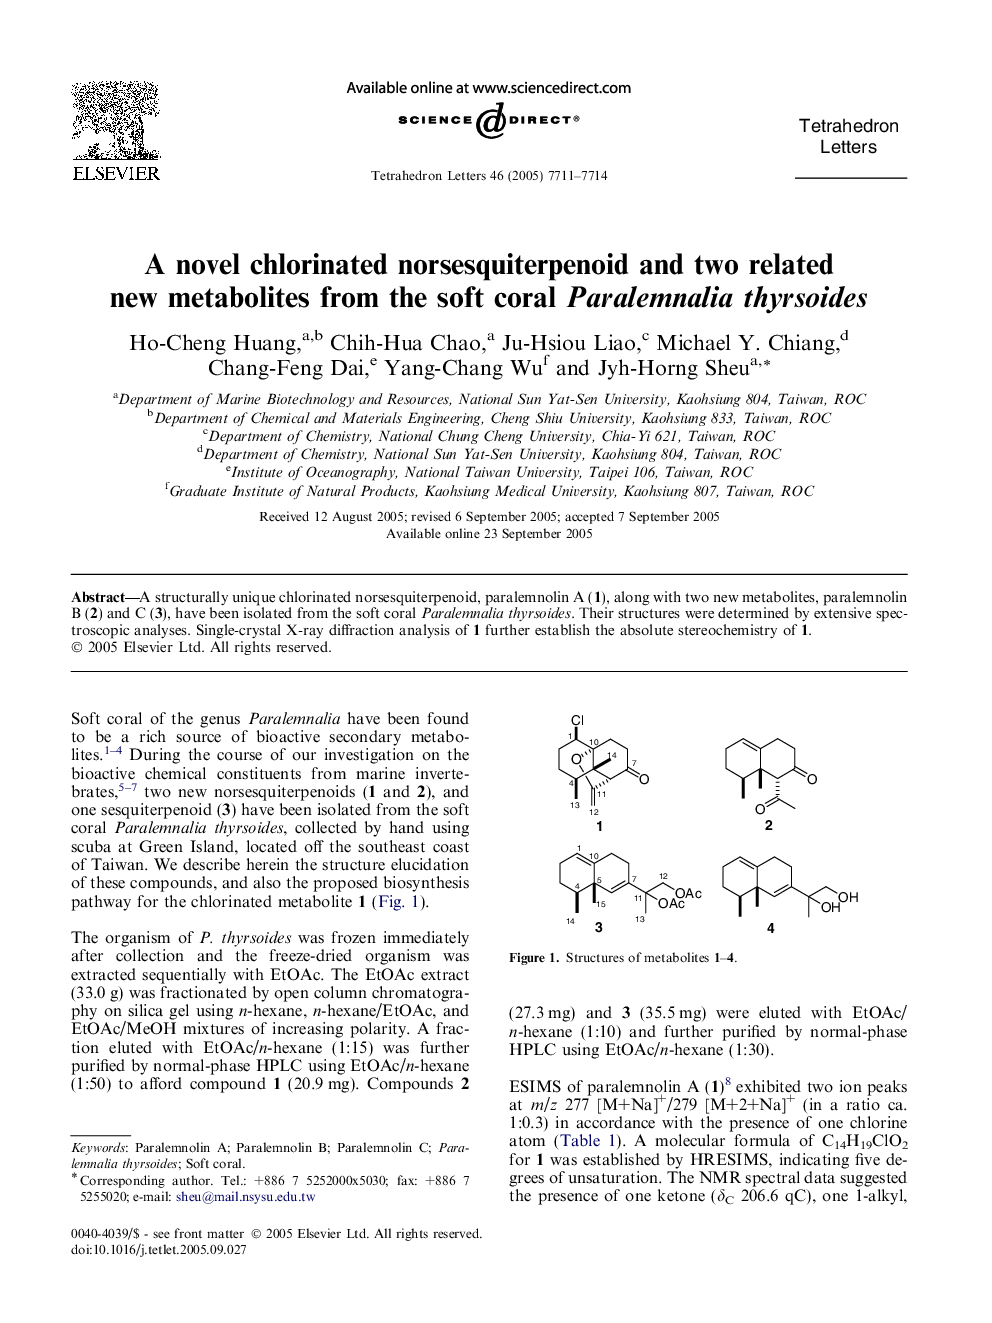 A novel chlorinated norsesquiterpenoid and two related new metabolites from the soft coral Paralemnalia thyrsoides